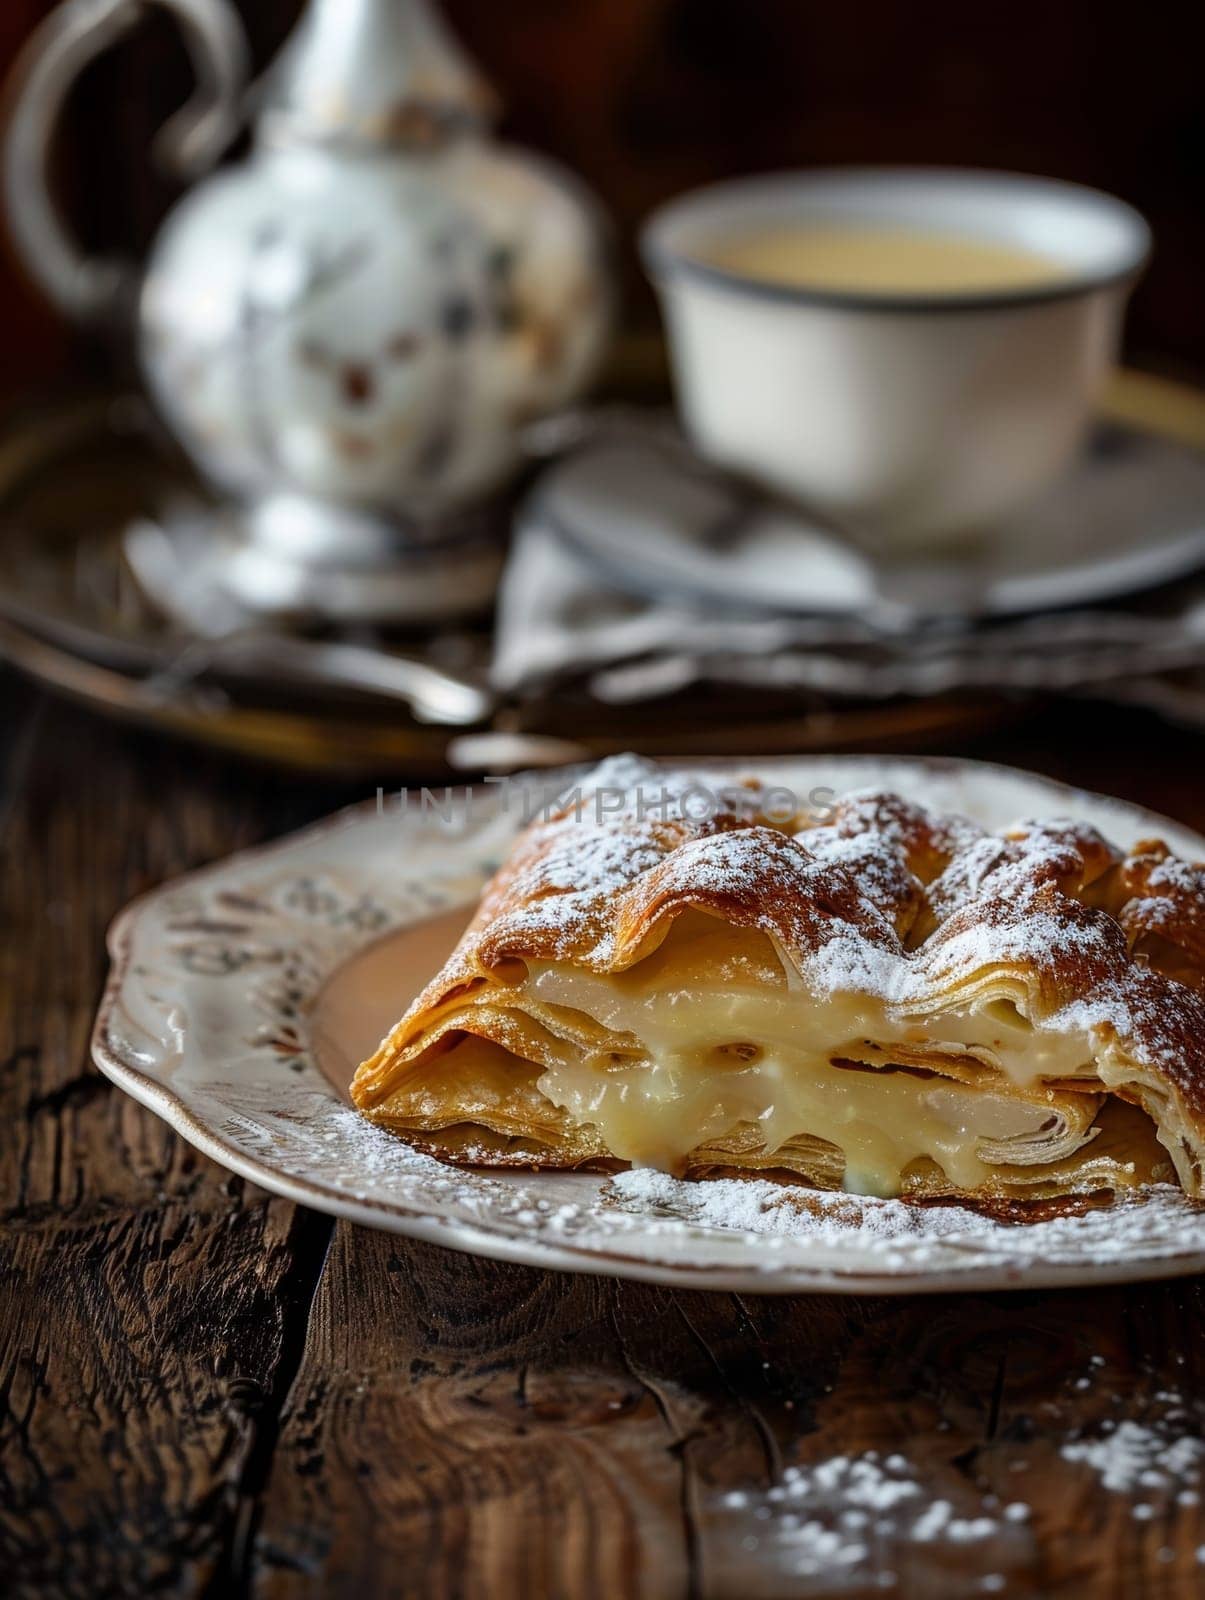 Authentic Austrian apfelstrudel, a flaky pastry filled with sweet apples, dusted with powdered sugar, and served with a side of rich vanilla sauce, captured on an antique plate. by sfinks